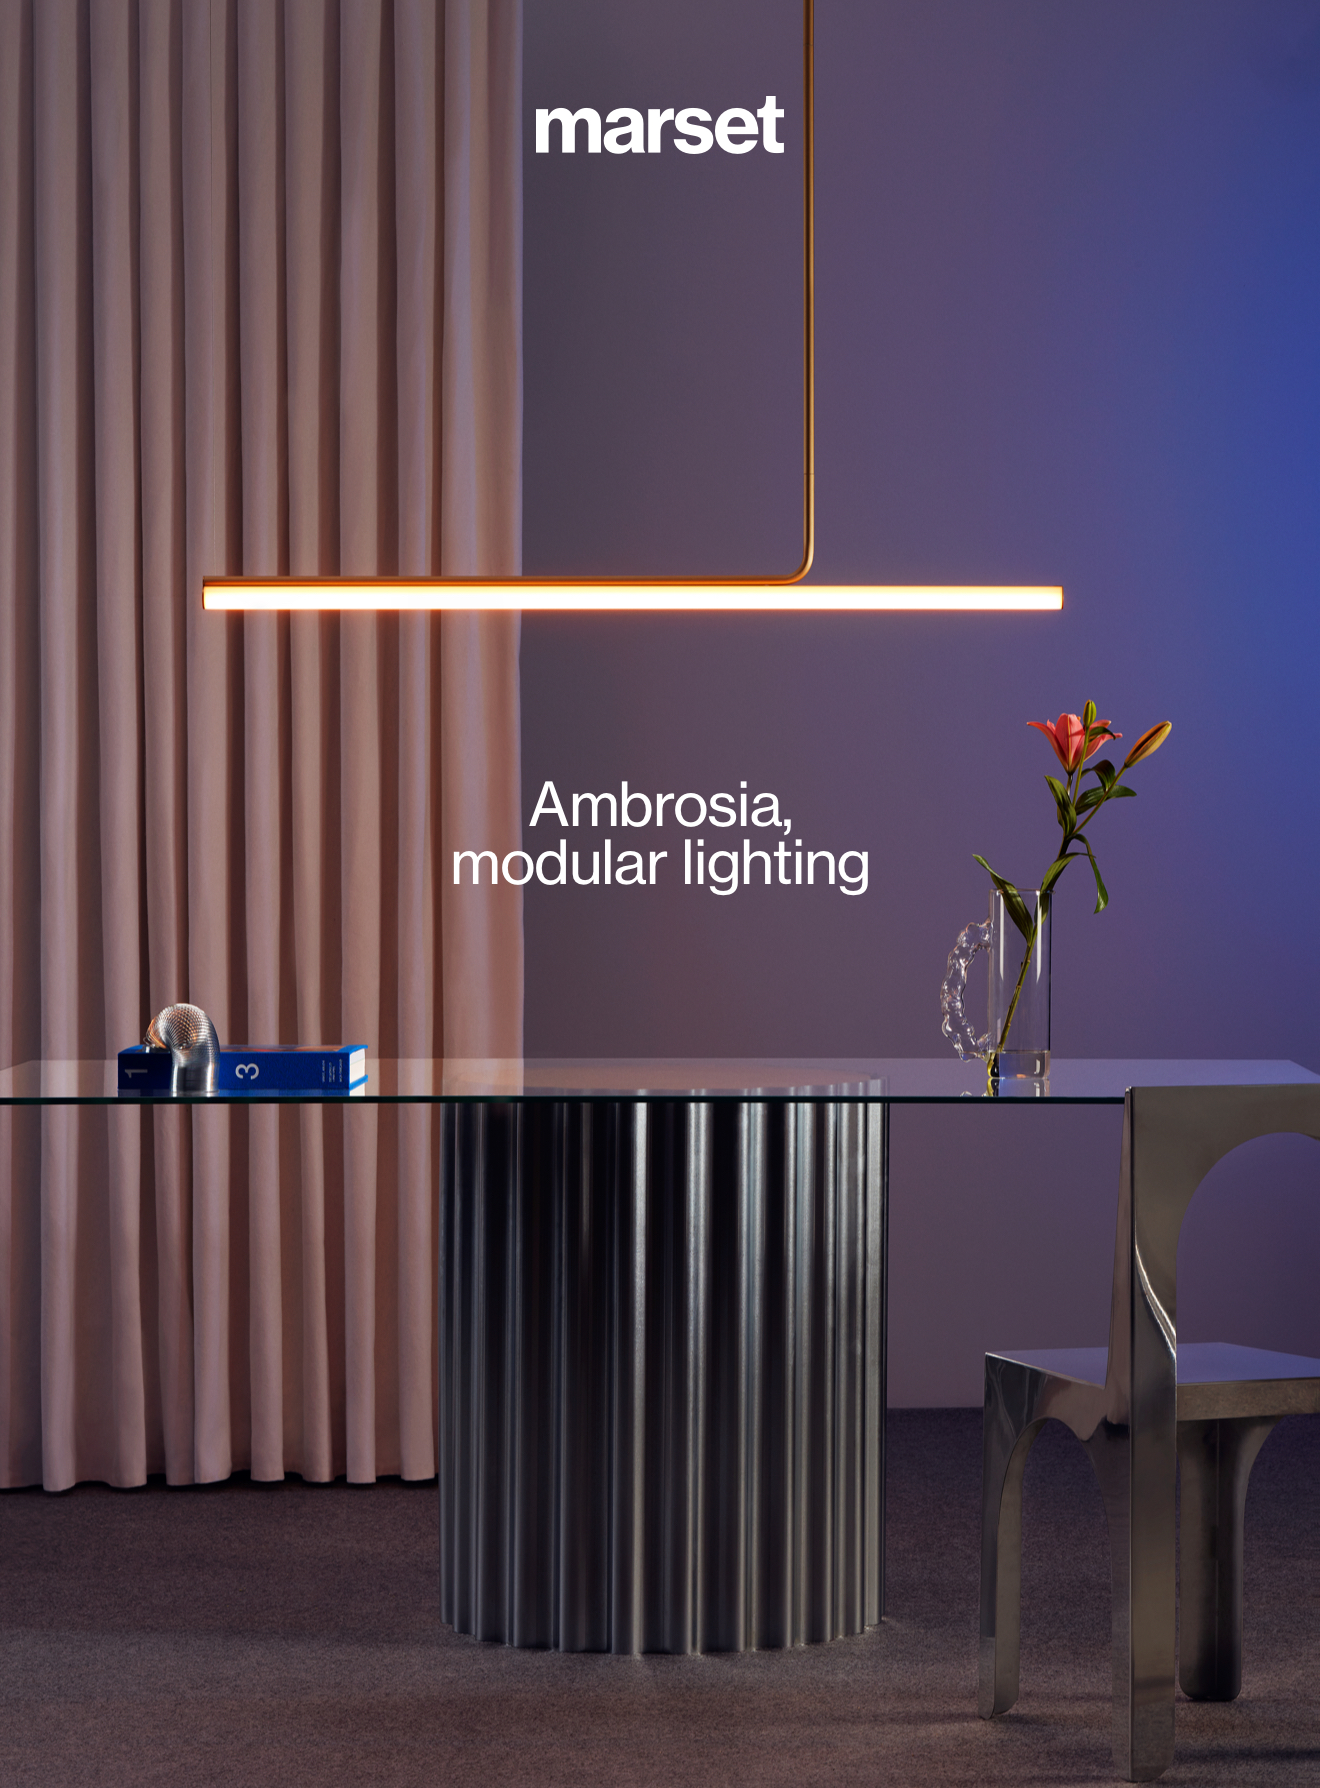 New Ambrosia lighting system: simplicity, functionality and aesthetics